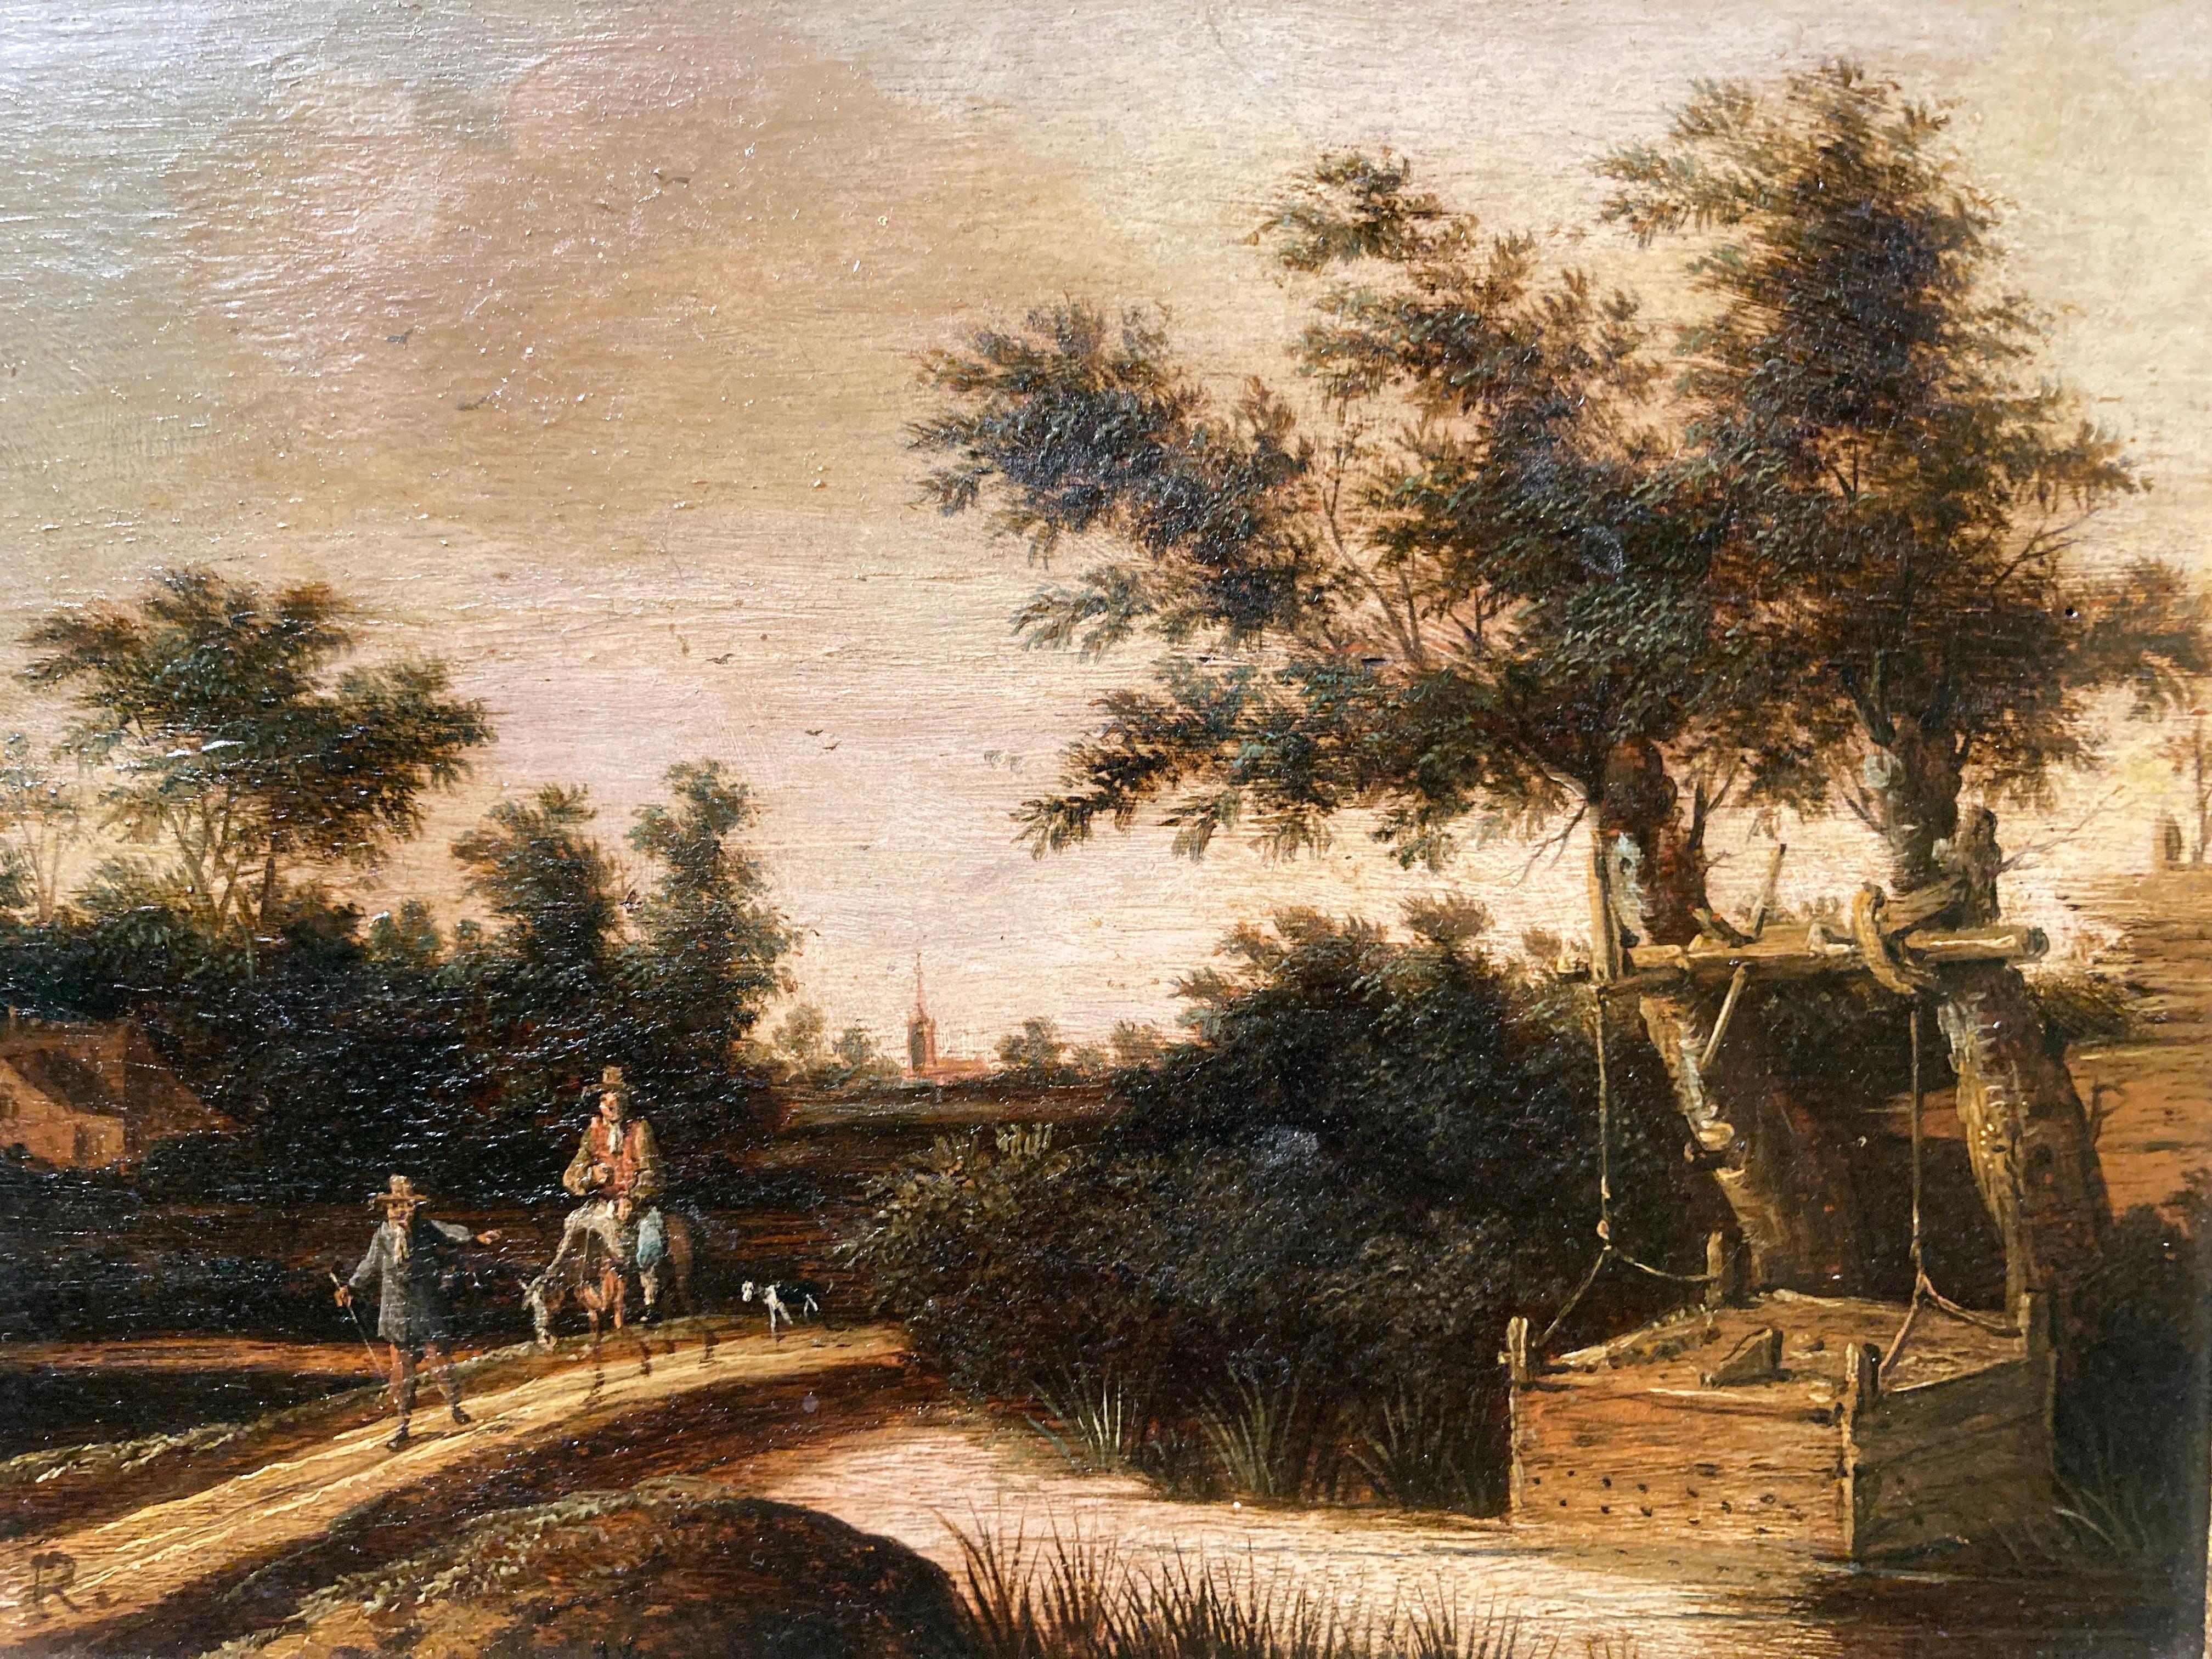 Circle of Jacob Ruisdael, Landscape with Riders and a Well, Flemish Art